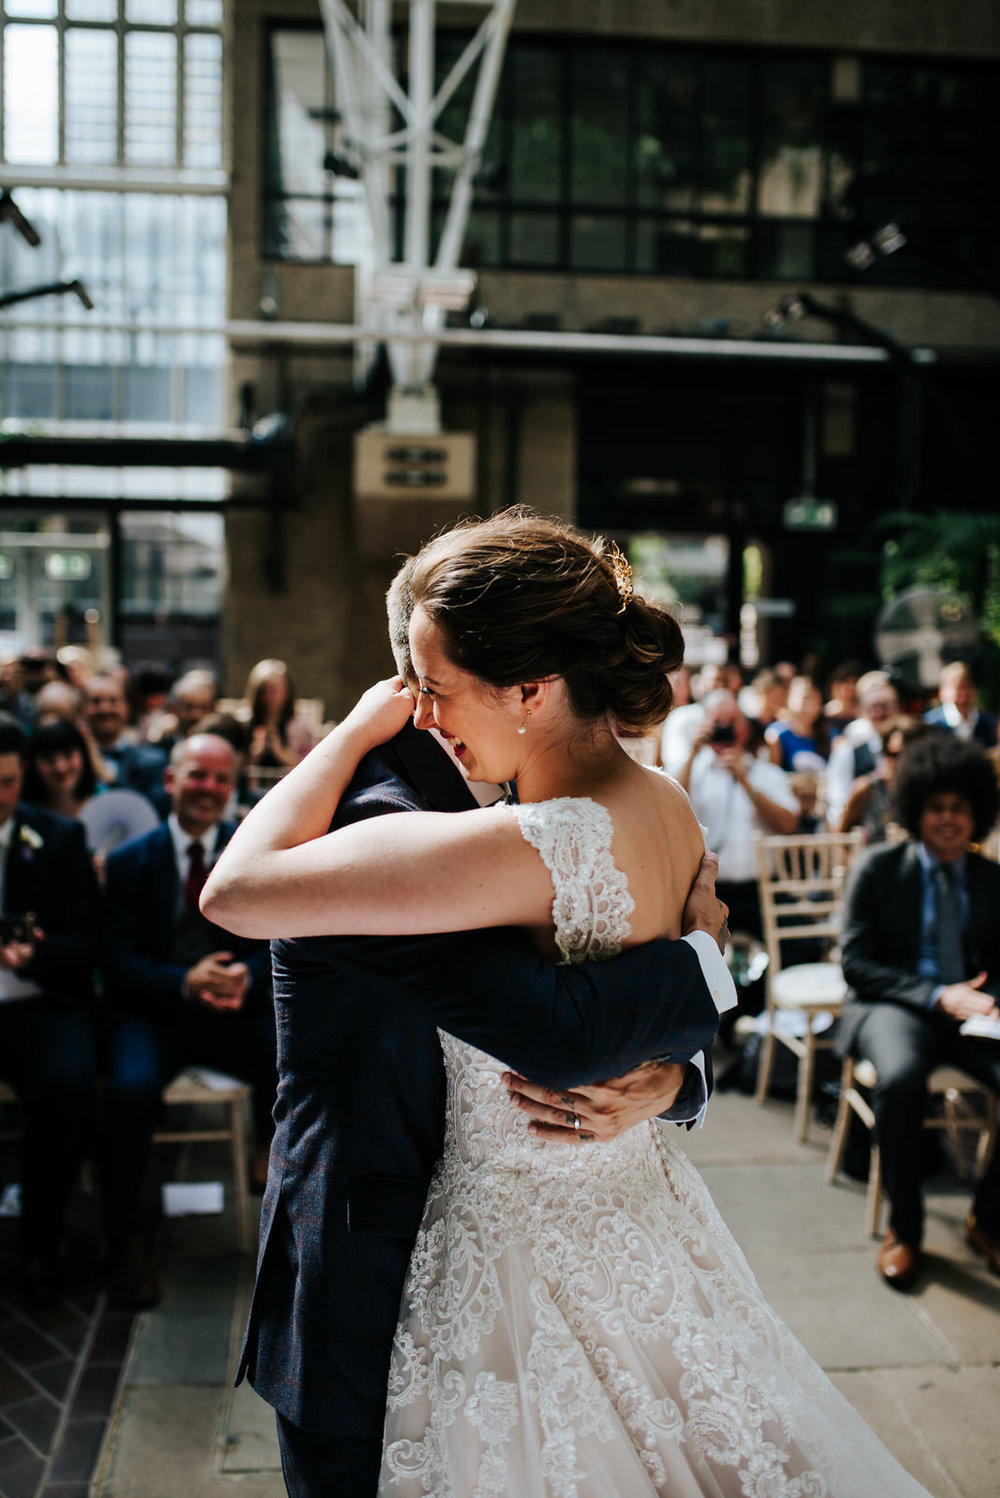 Bride and groom embrace each other in a joyful hug after sharing